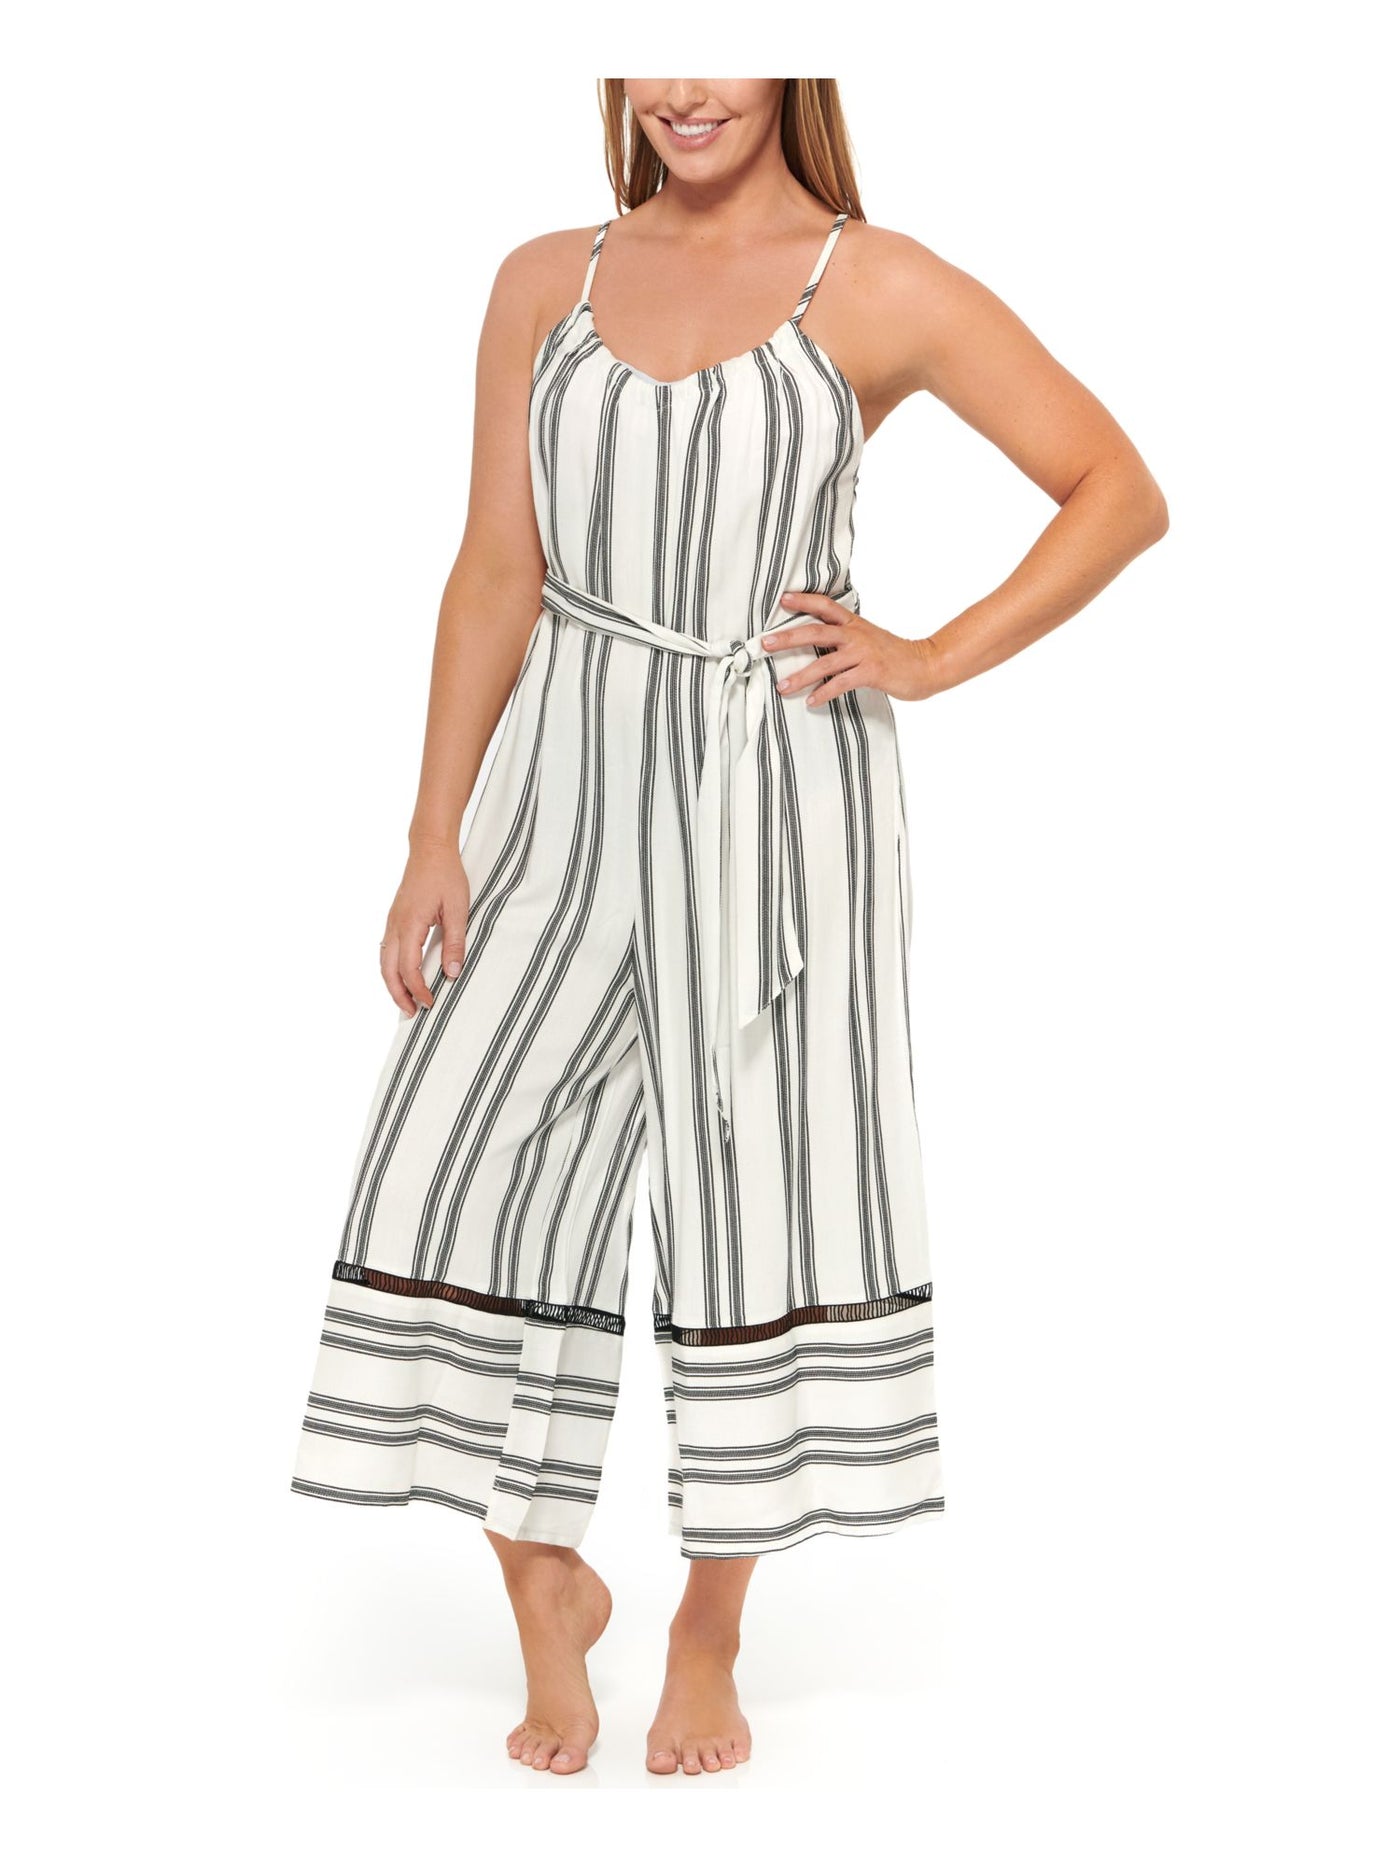 DOTTI Women's White Striped Wide Leg Jumpsuit Belted Adjustable Newport Scoop Neck Swimsuit Cover Up S